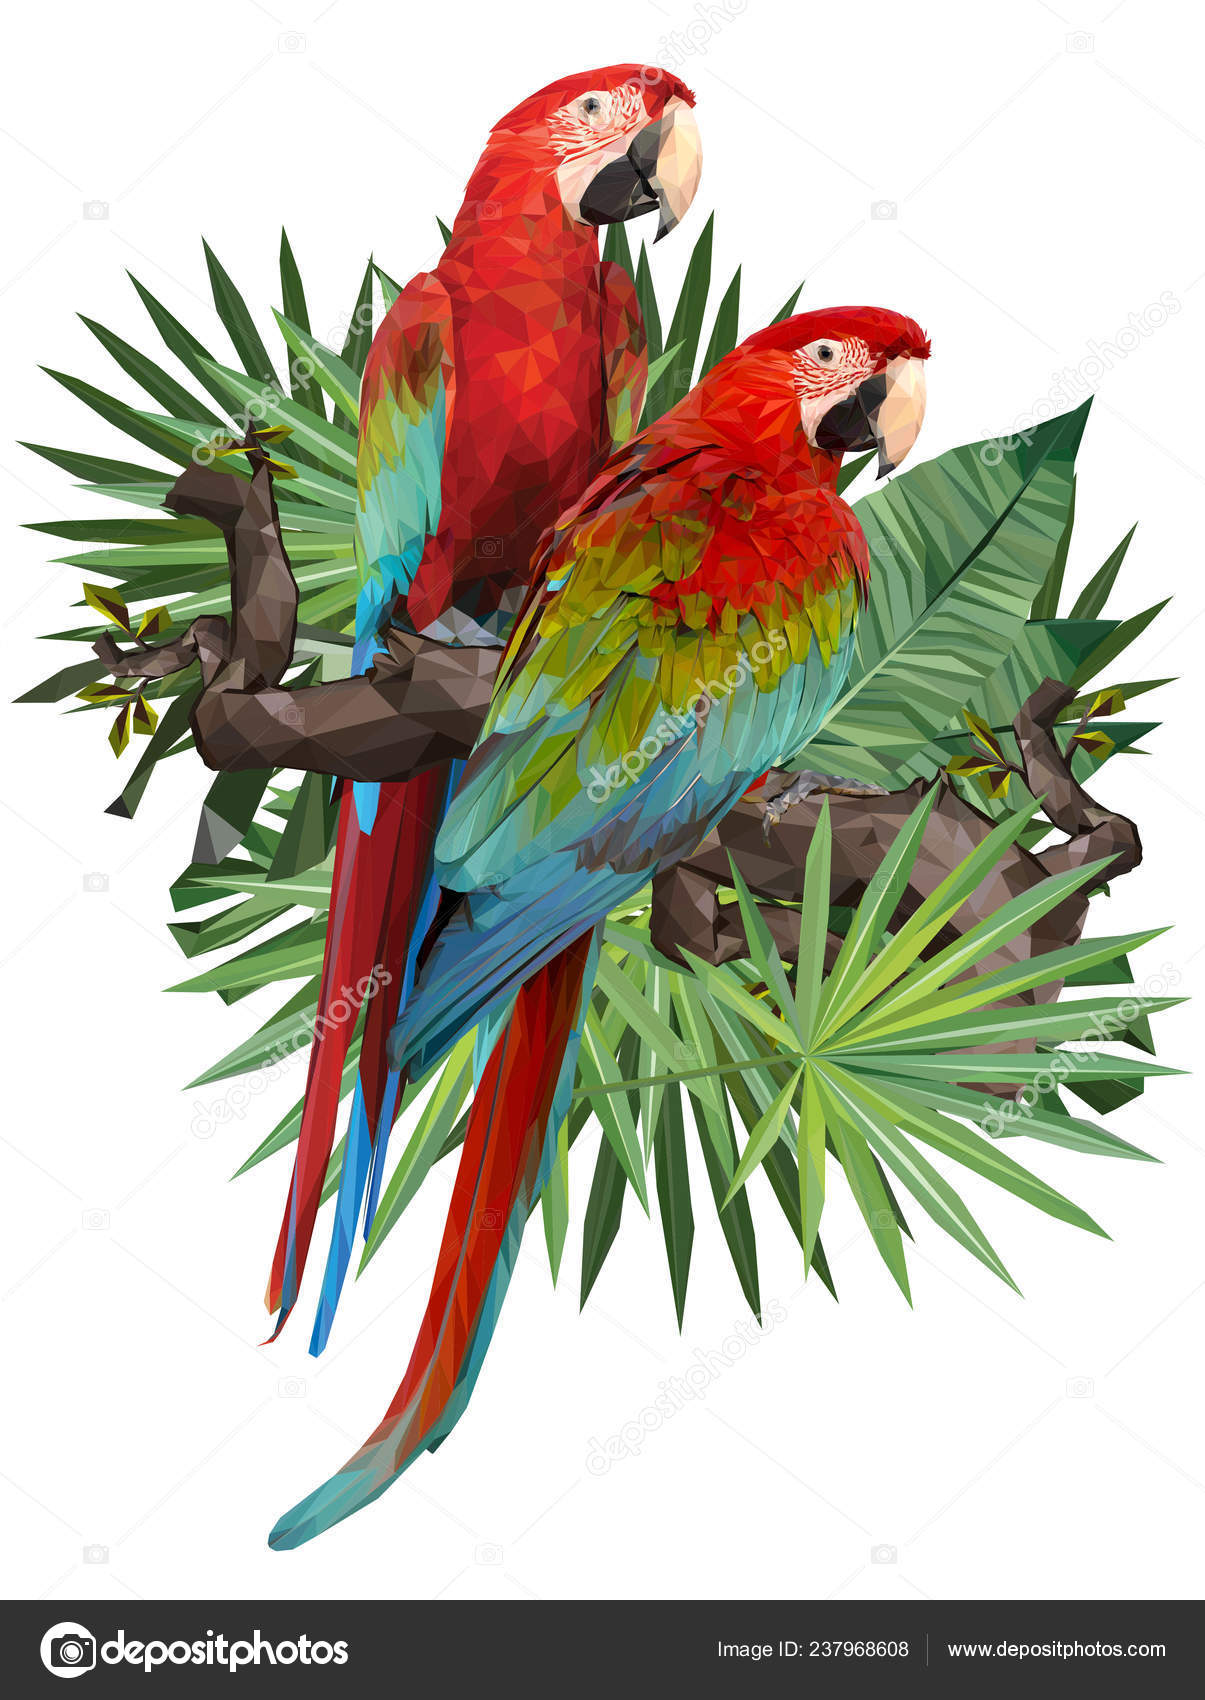 Illustration Polygonal Drawing Green Wing Blue Gold Macaw Birds Tropical Stock Photo C Lewzsan Gmail Com 237968608,Wii Games For Kids